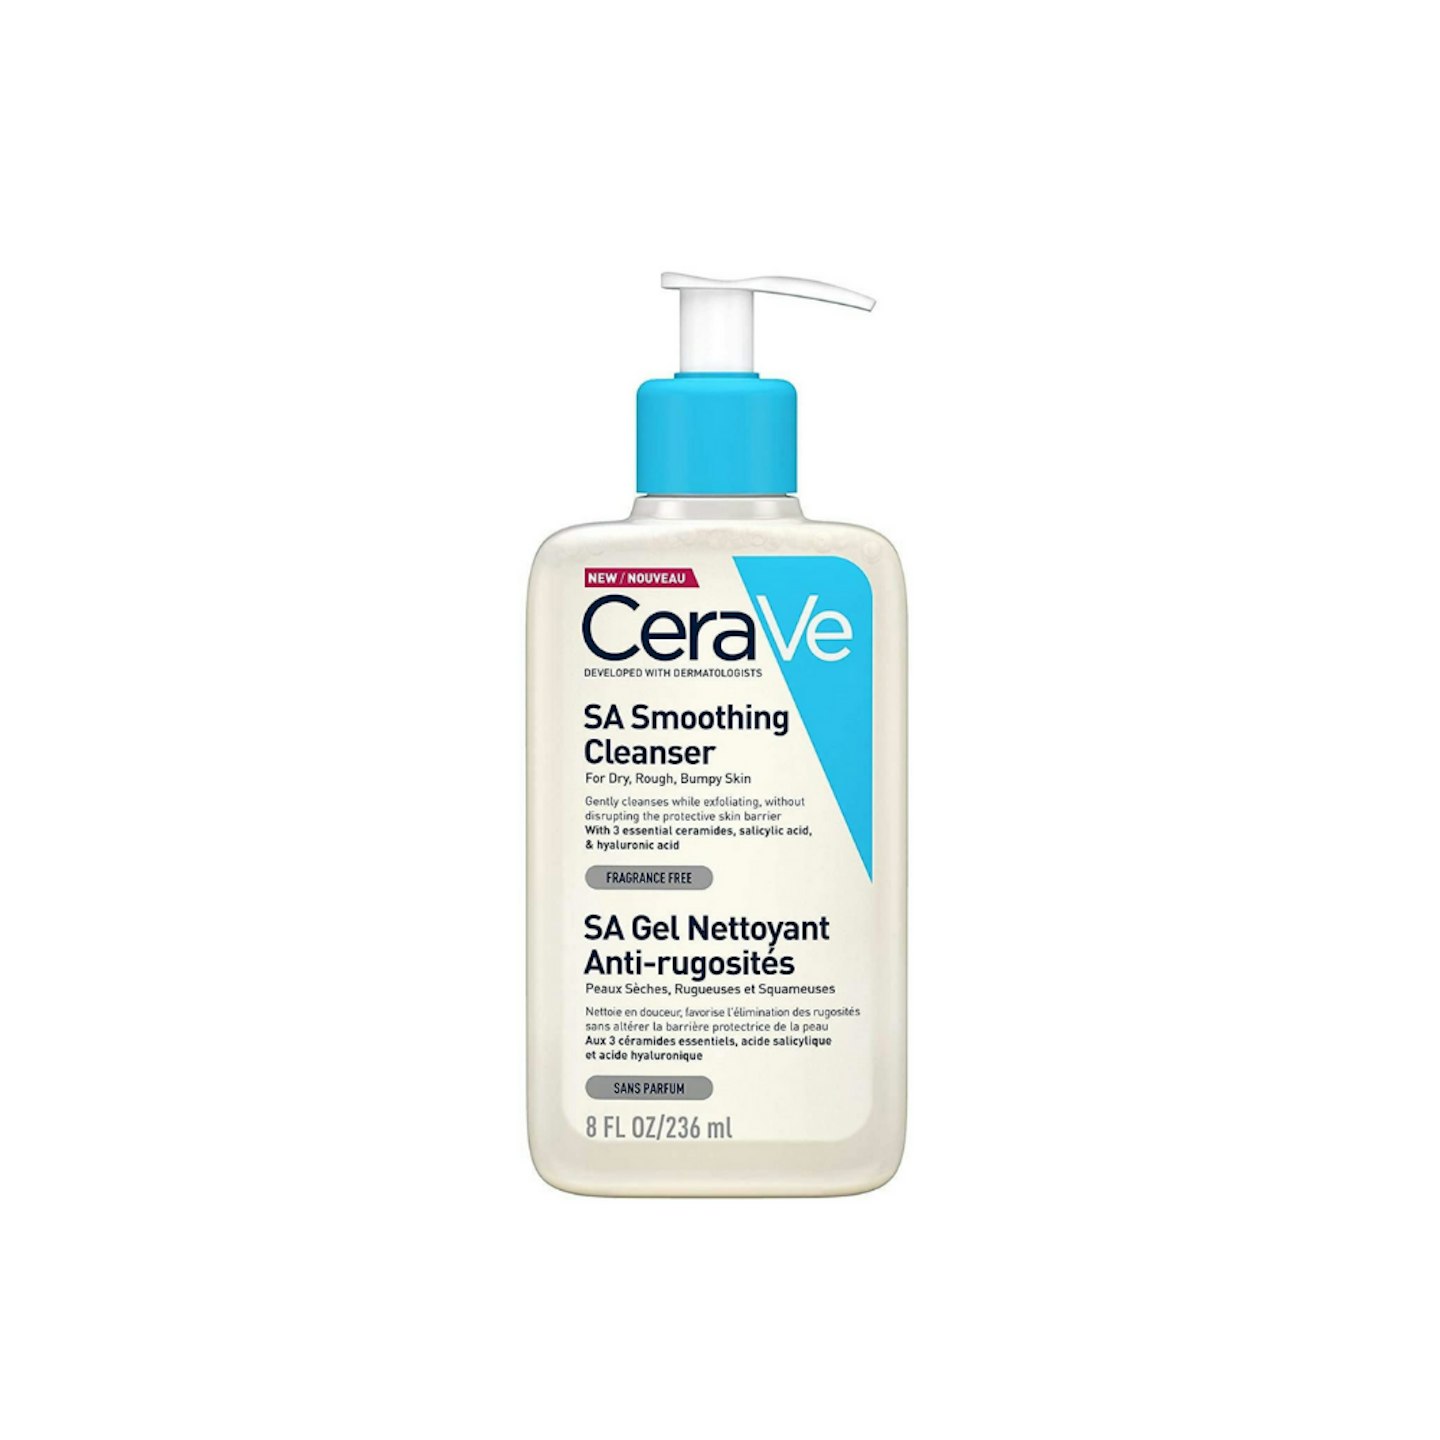 CeraVe smoothing cleanser with sa